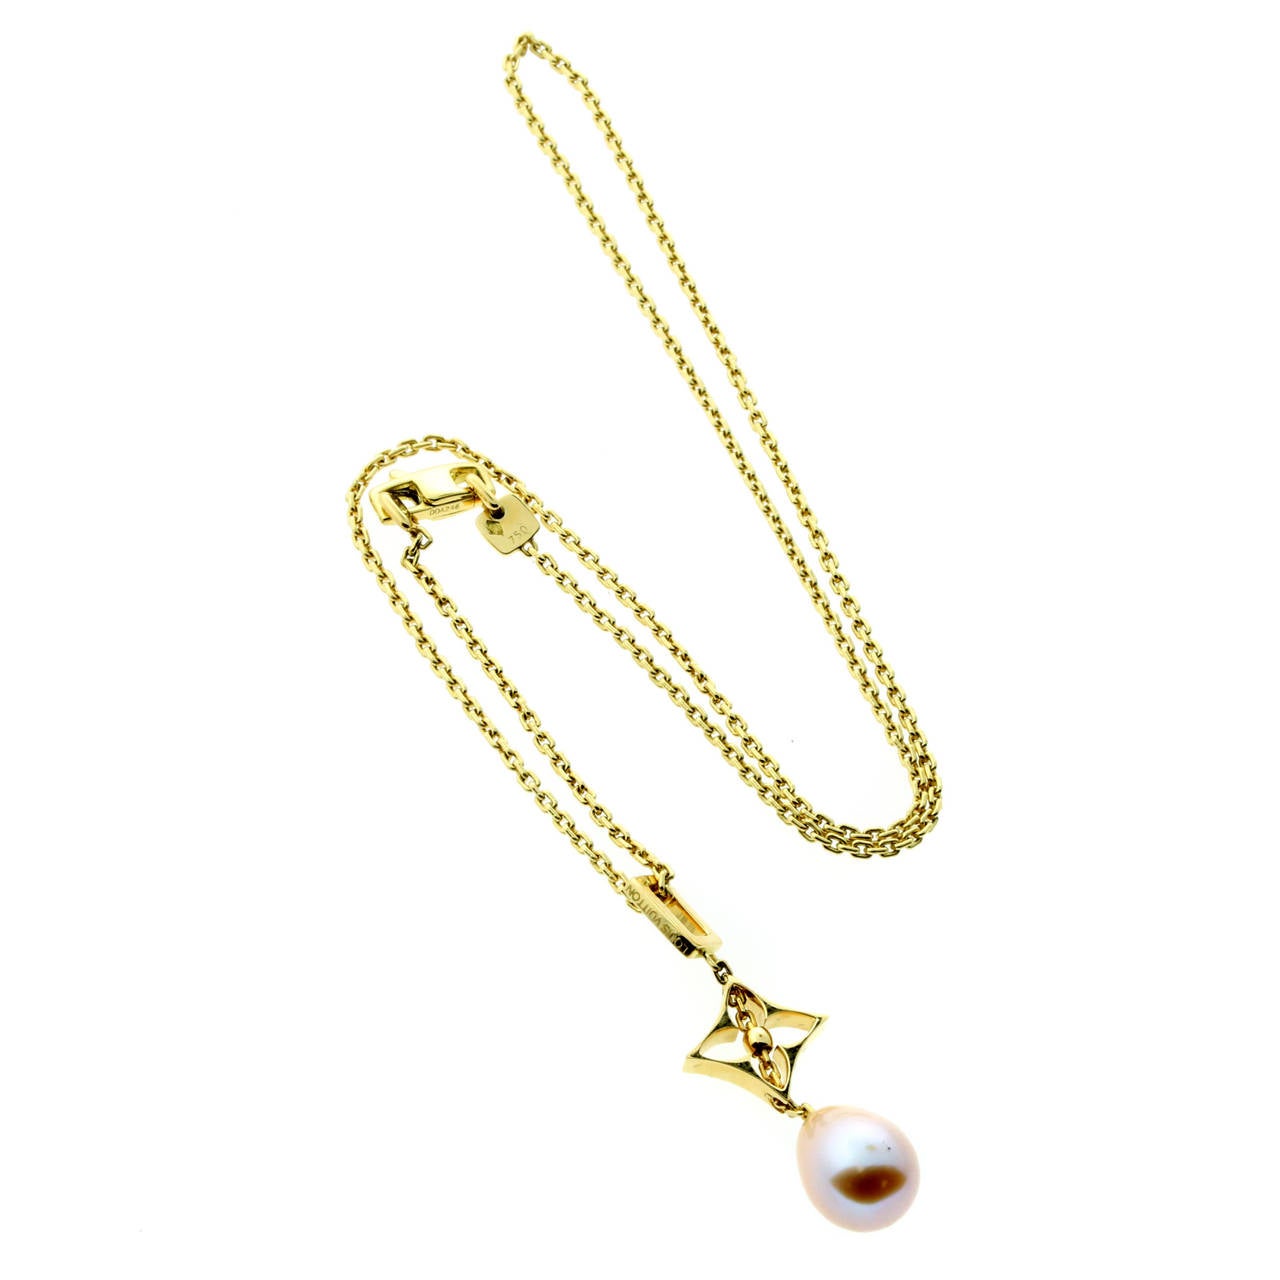 Louis Vuitton Pearl Gold Necklace at 1stdibs